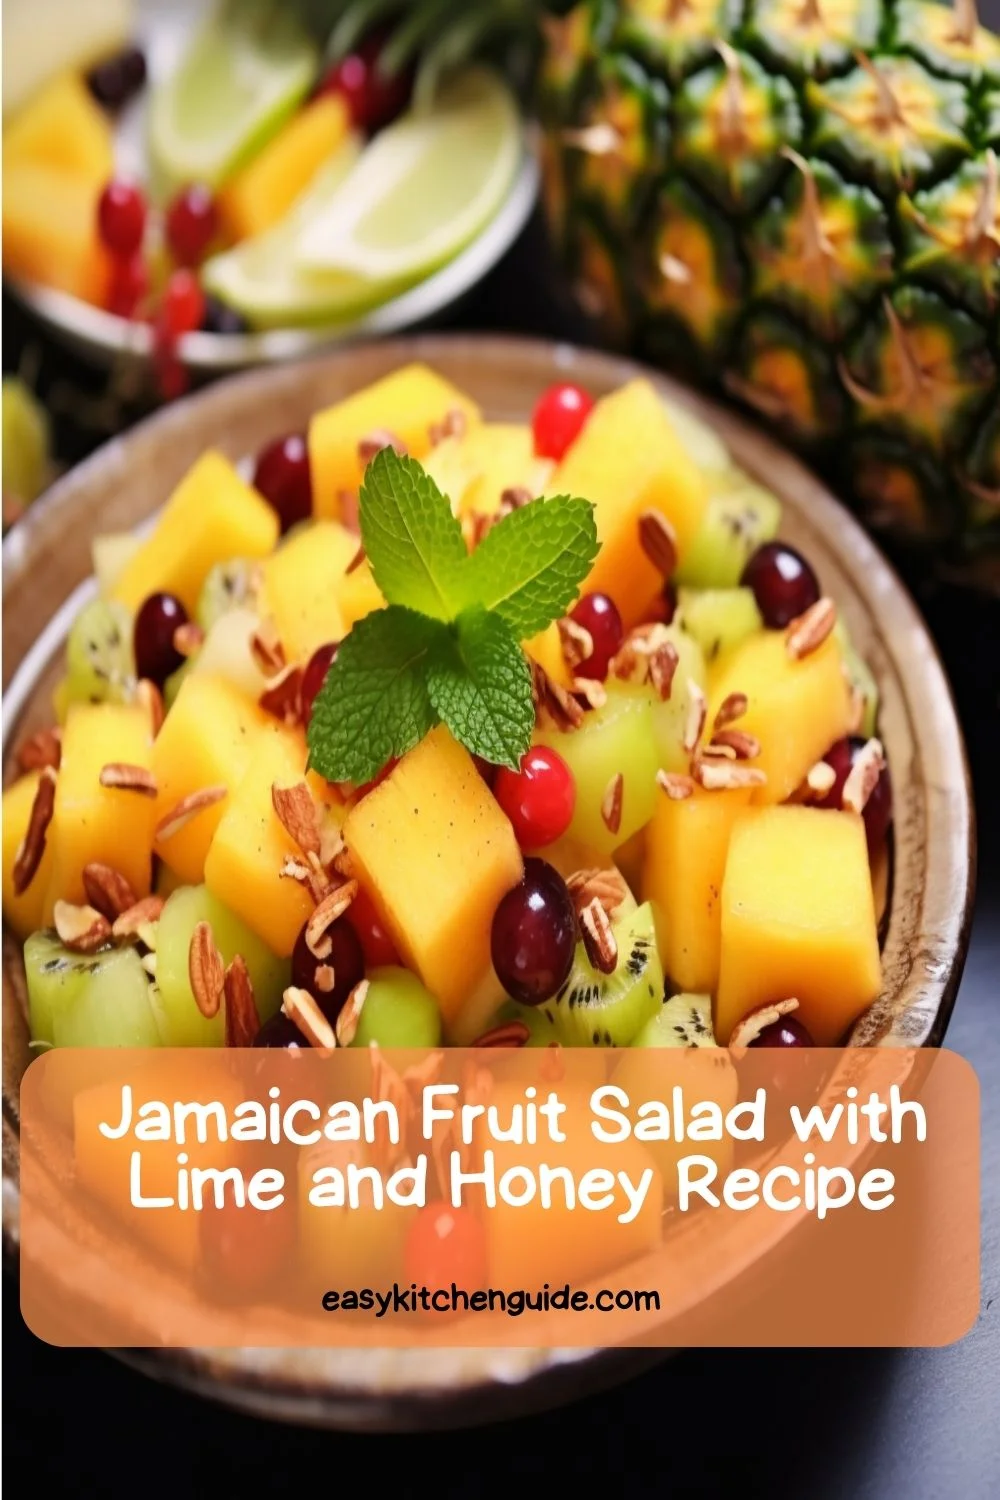 Jamaican Fruit Salad with Lime and Honey Recipe